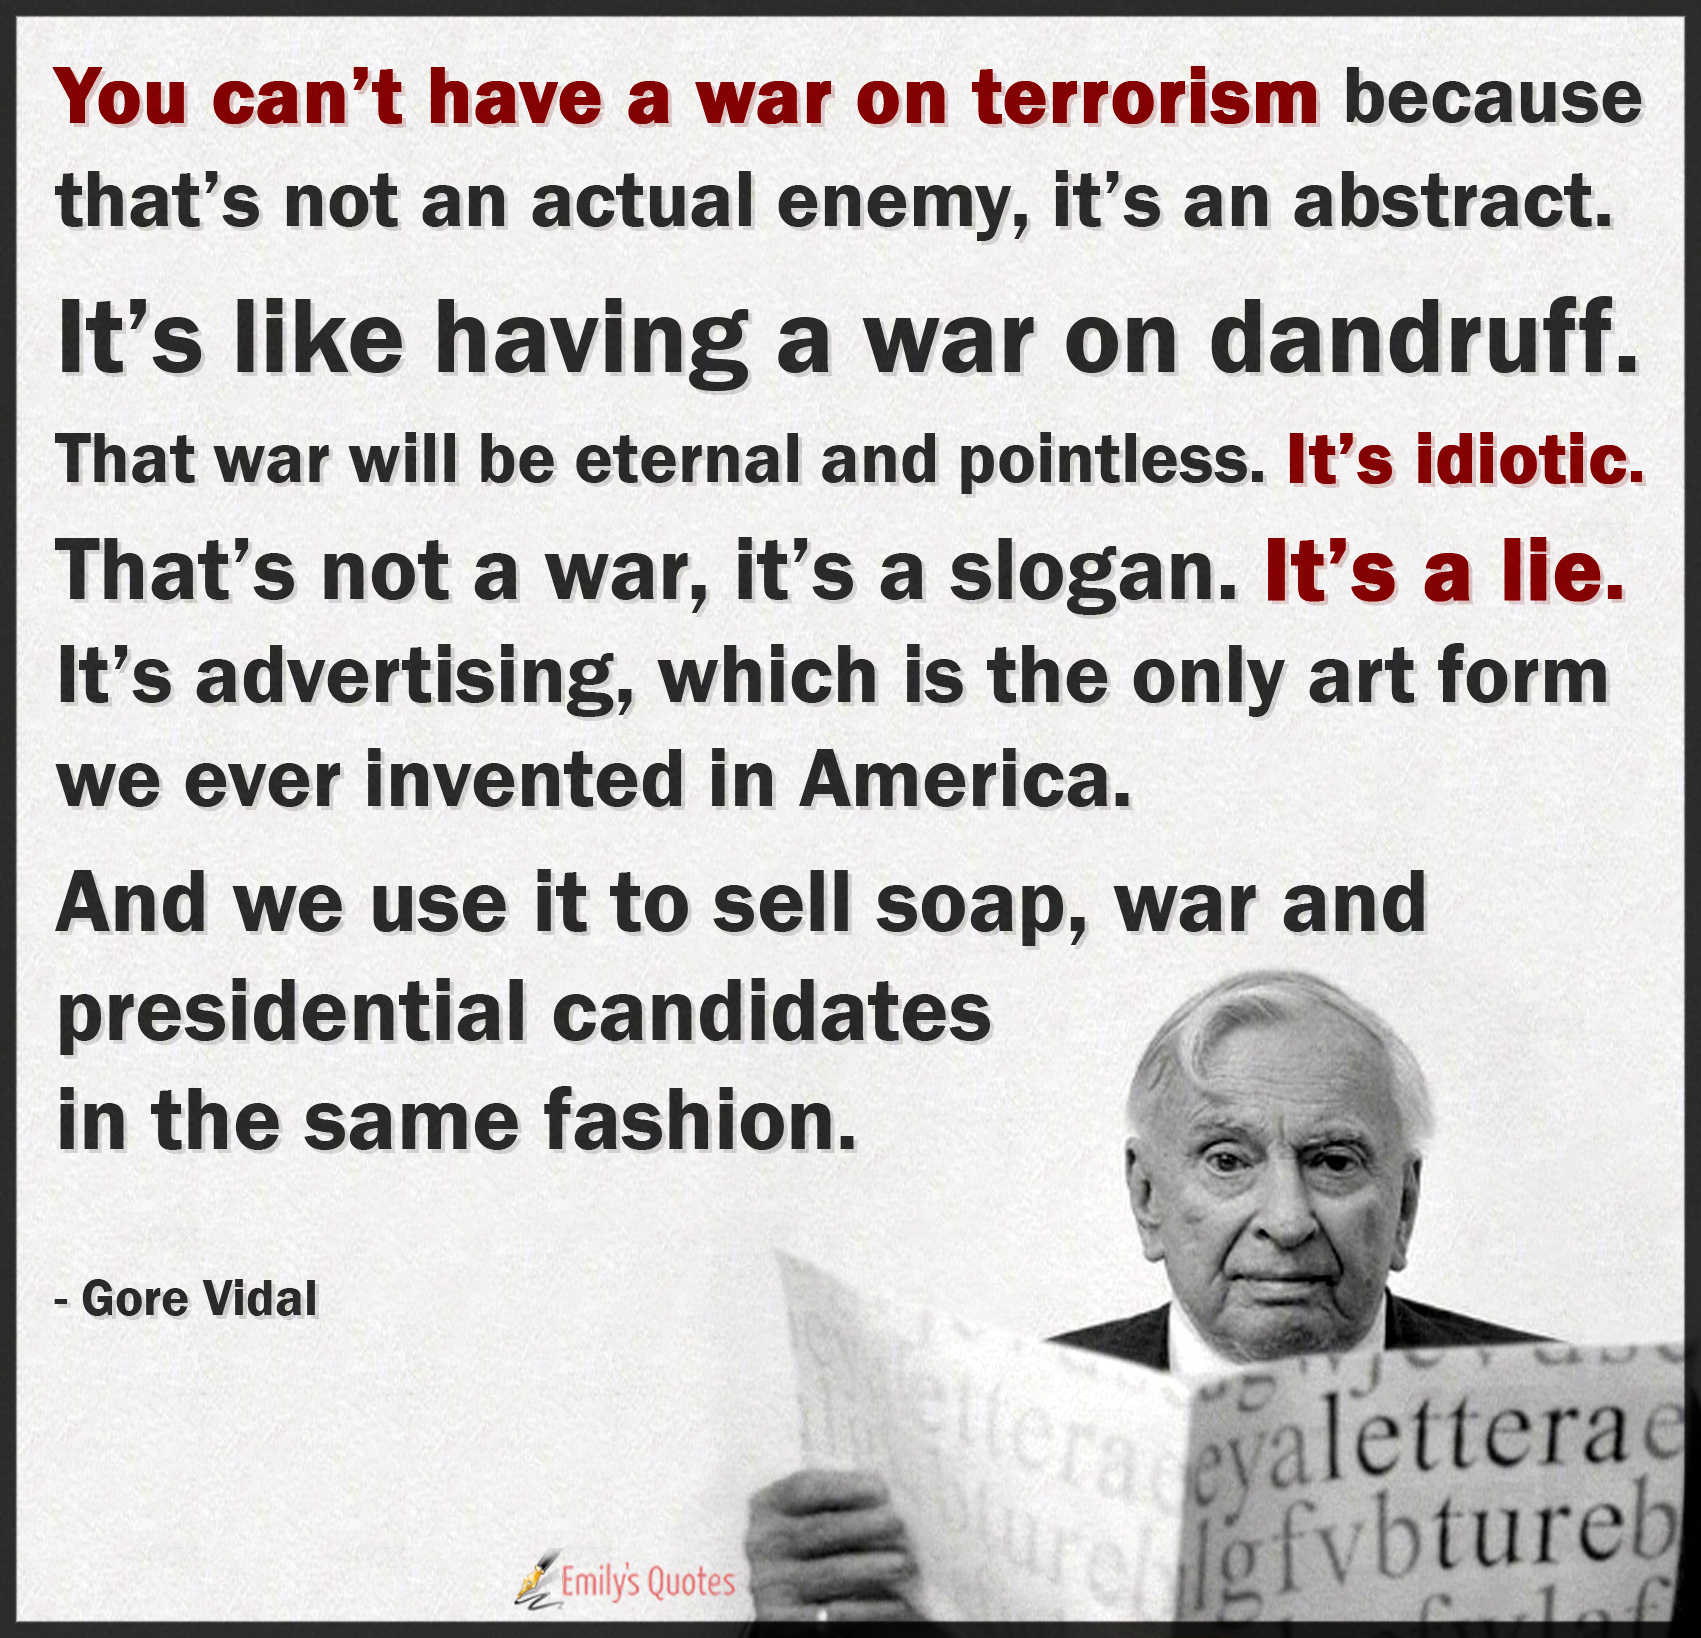 You can’t have a war on terrorism because that’s not an actual enemy, it’s an abstract